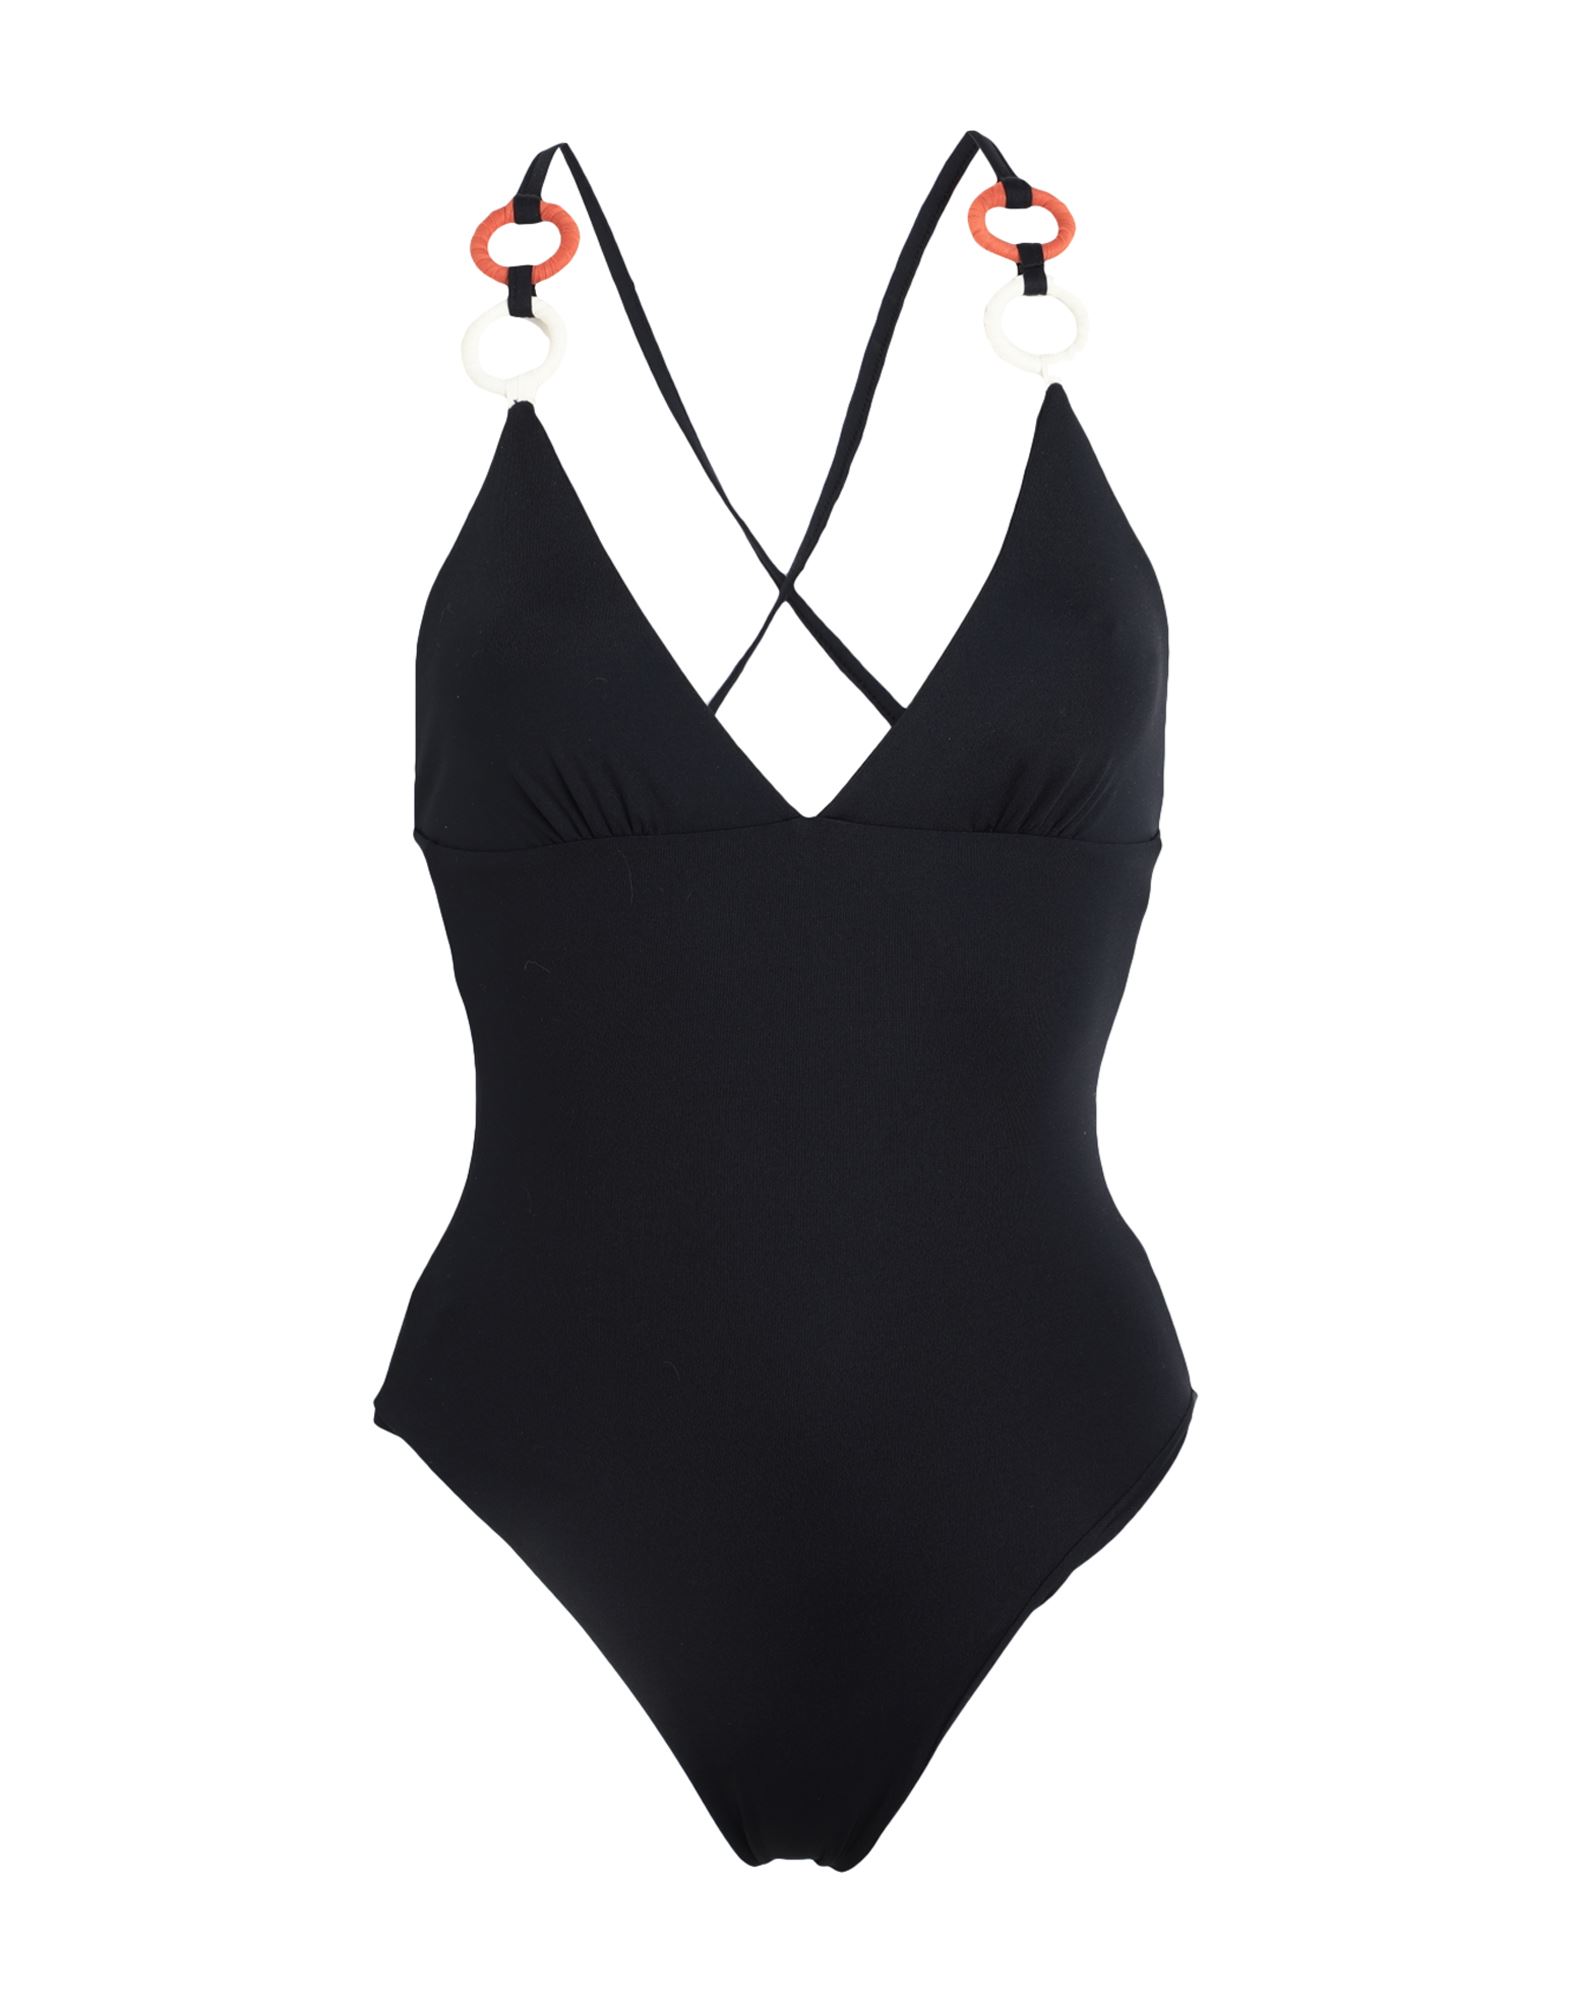 S And S One-piece Swimsuits In Black